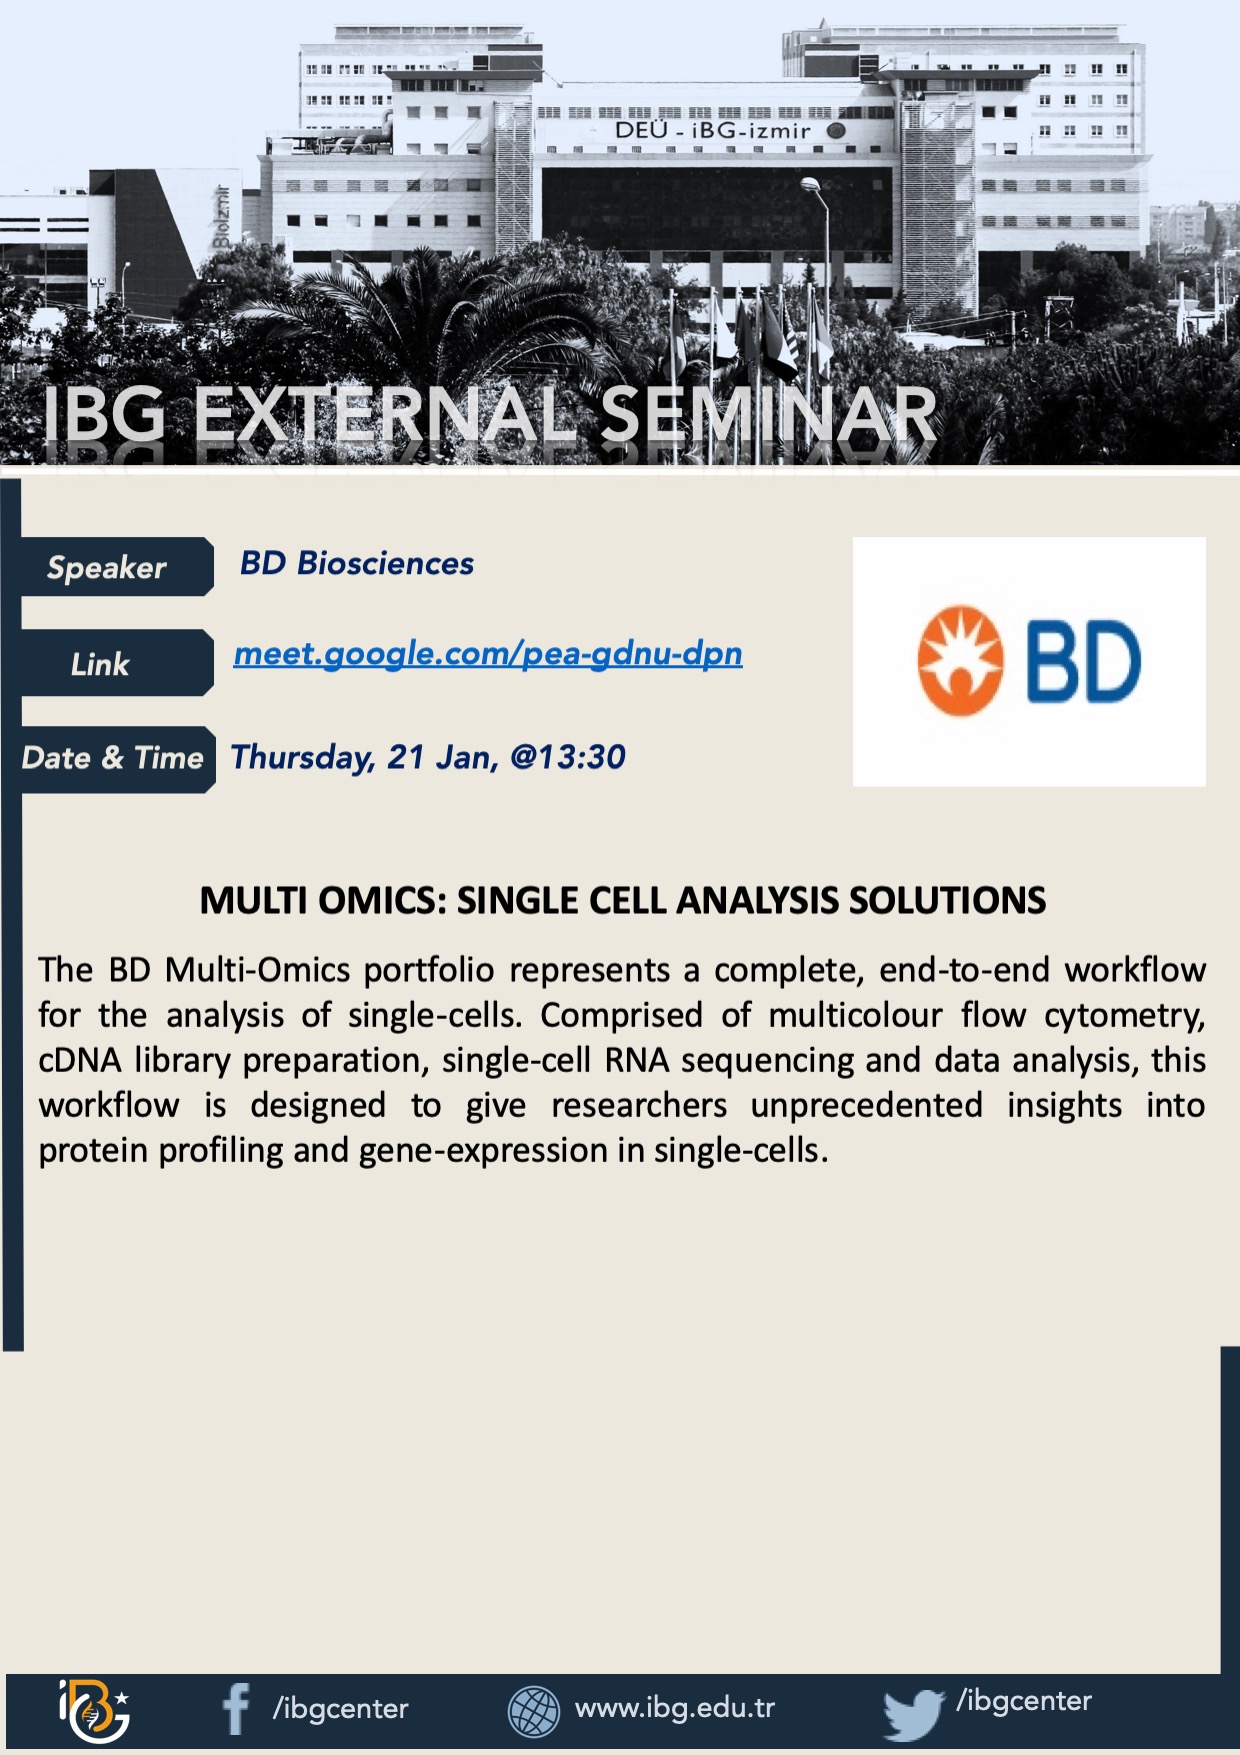 MULTI OMICS: SINGLE CELL ANALYSIS SOLUTIONS